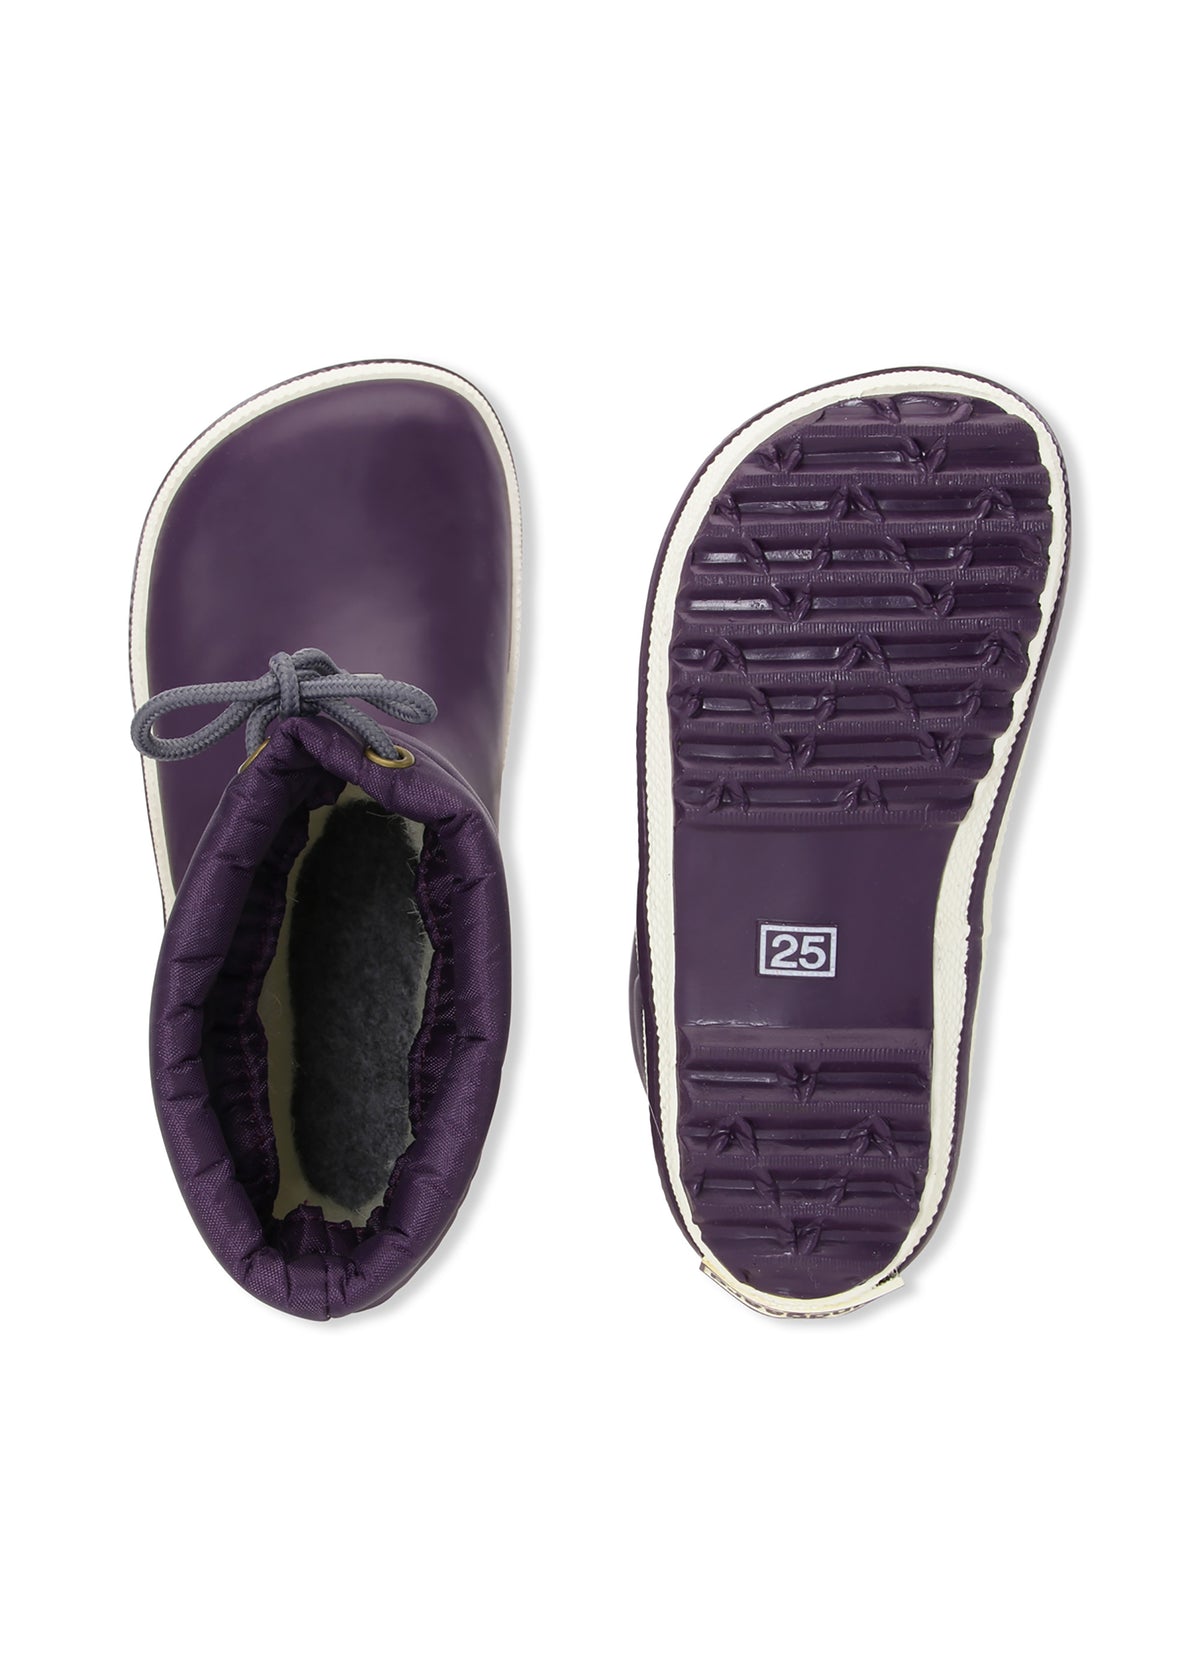 Rubber boots with a warm lining - purple, drawstrings, Cirro High Warm